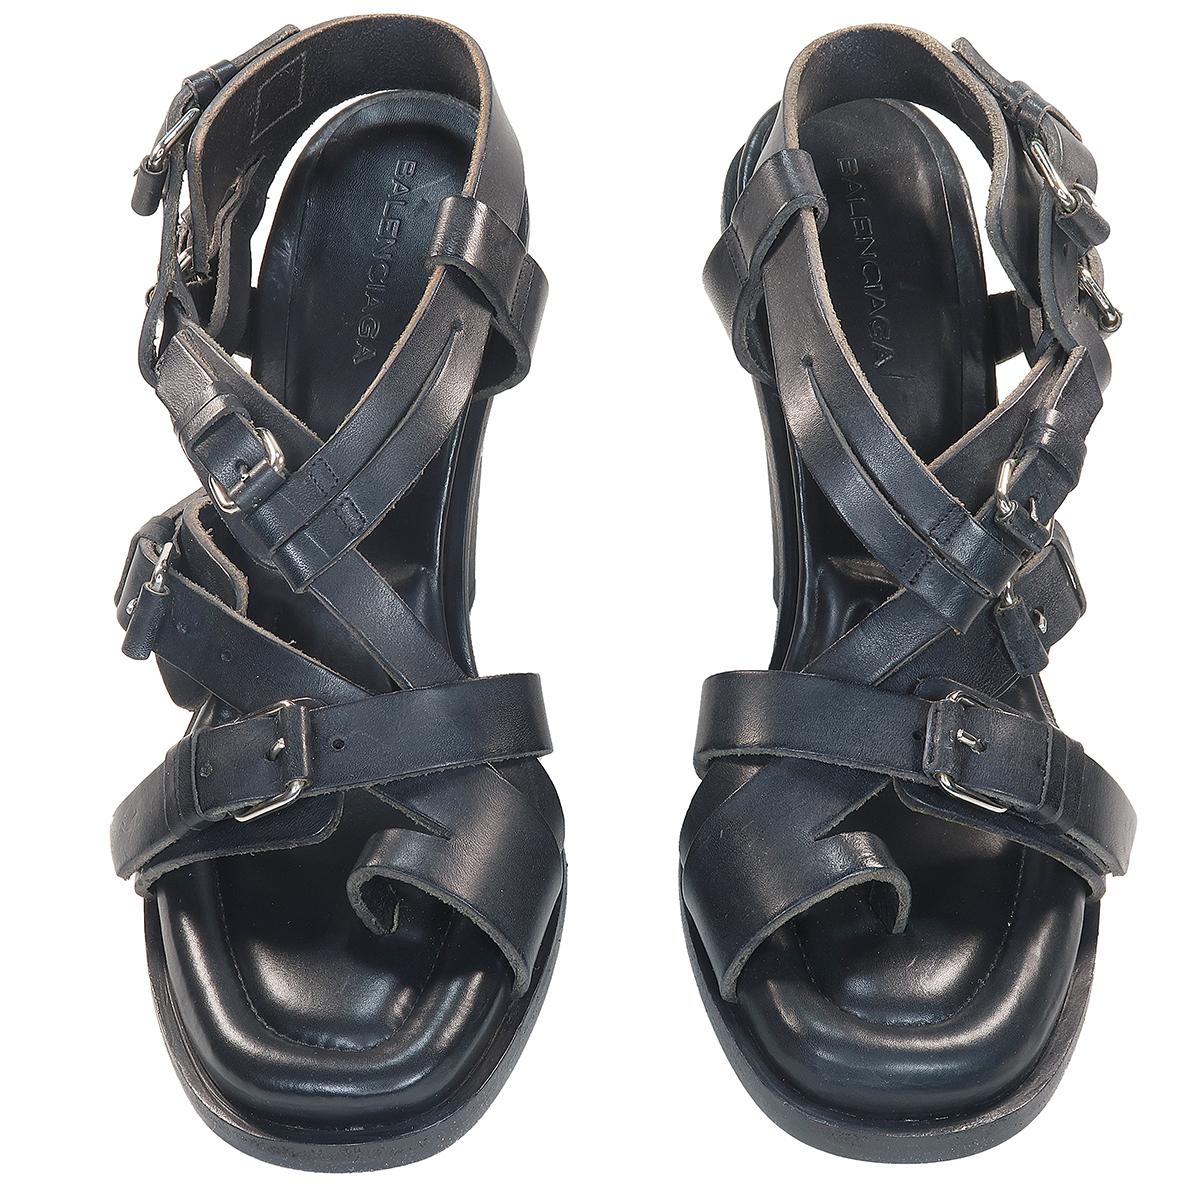 BALENCIAGA BY NICOLAS GHESQUIÈRE & PIERRE HARDY

Leather High-heeled Buckle and Strap Sandals (black)

Structure and fluidity is the constant balance infused in Nicolas Ghesquière’s work. You can count on the designer hailed as fashion’s new messiah